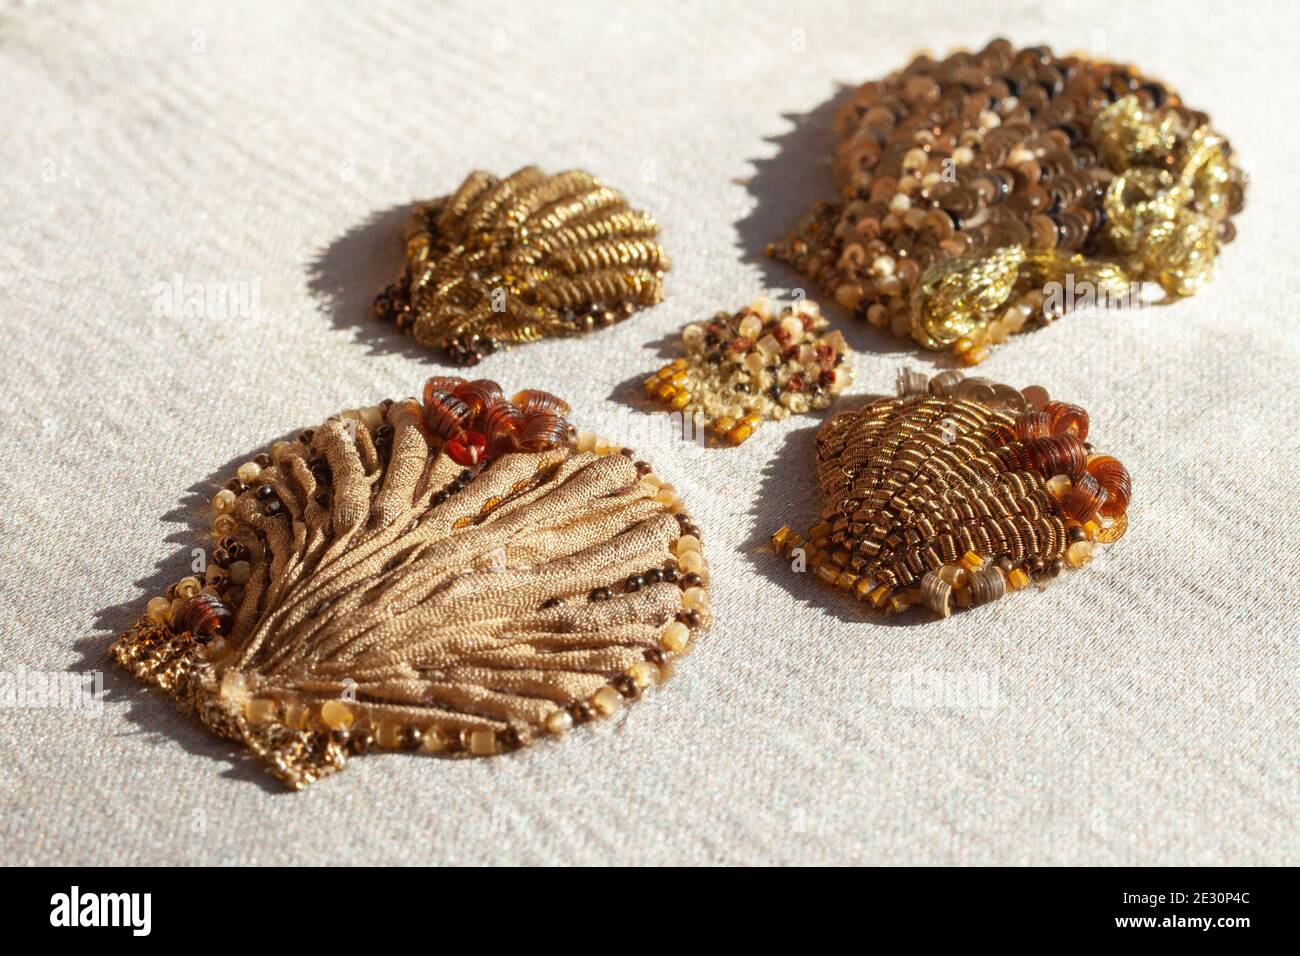 Couture embroidery of sea shells. Stock Photo